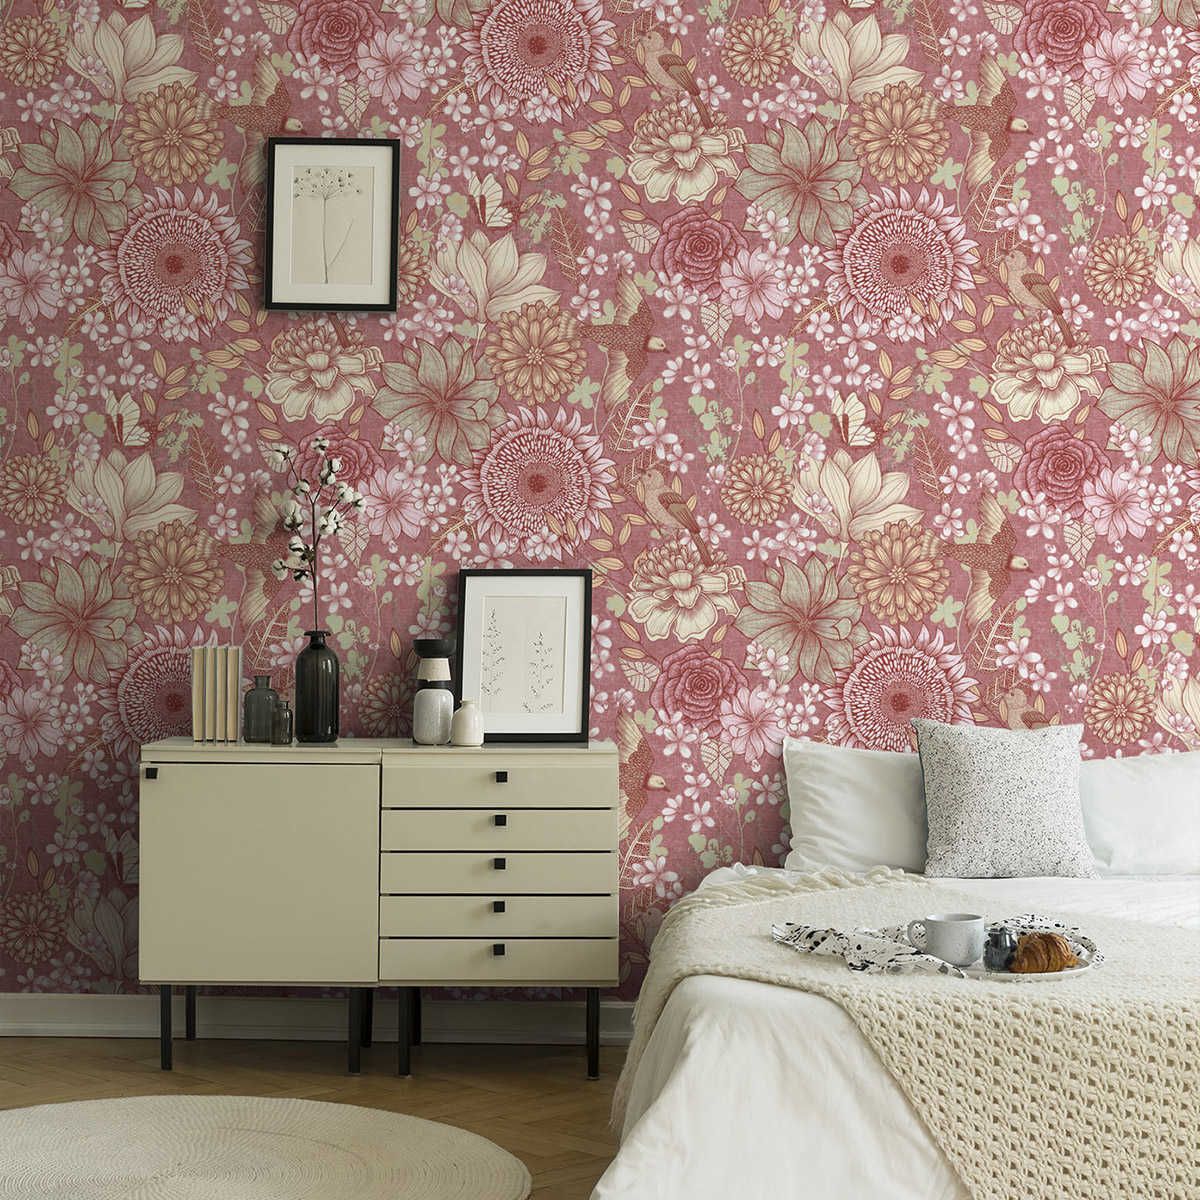         Floral non-woven wallpaper with various flowers and leaves - pink, white, cream
    